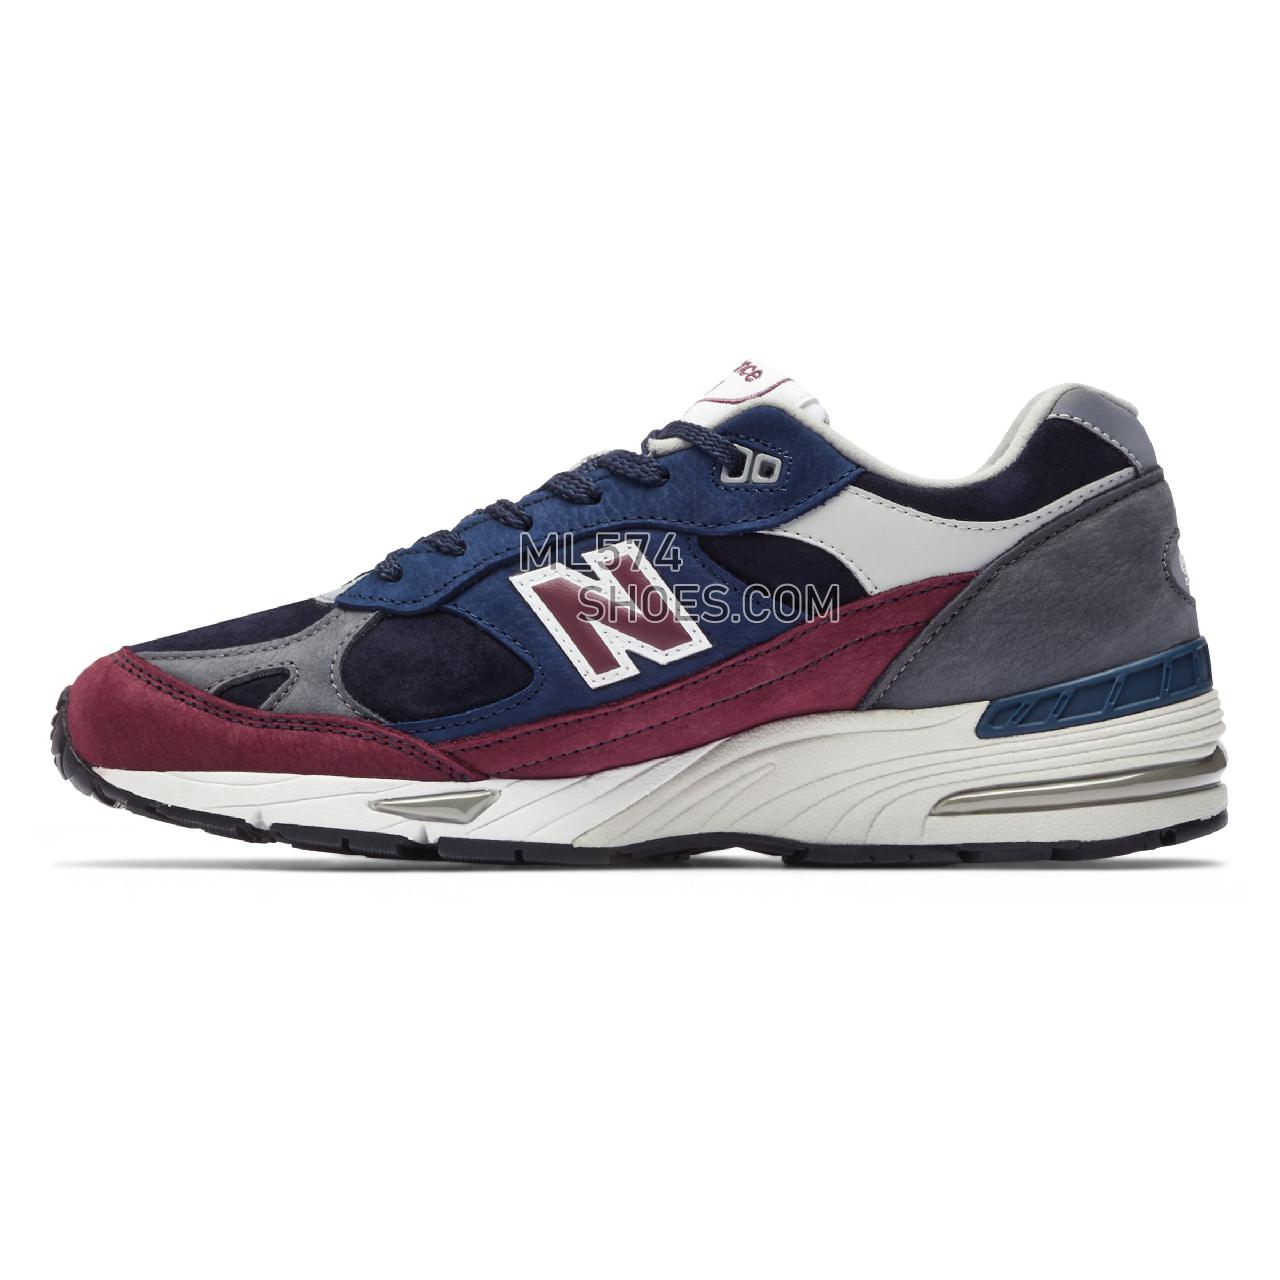 New Balance Made in UK 991 - Men's Made in USA And UK Sneakers - Navy Burgundy - M991RKB